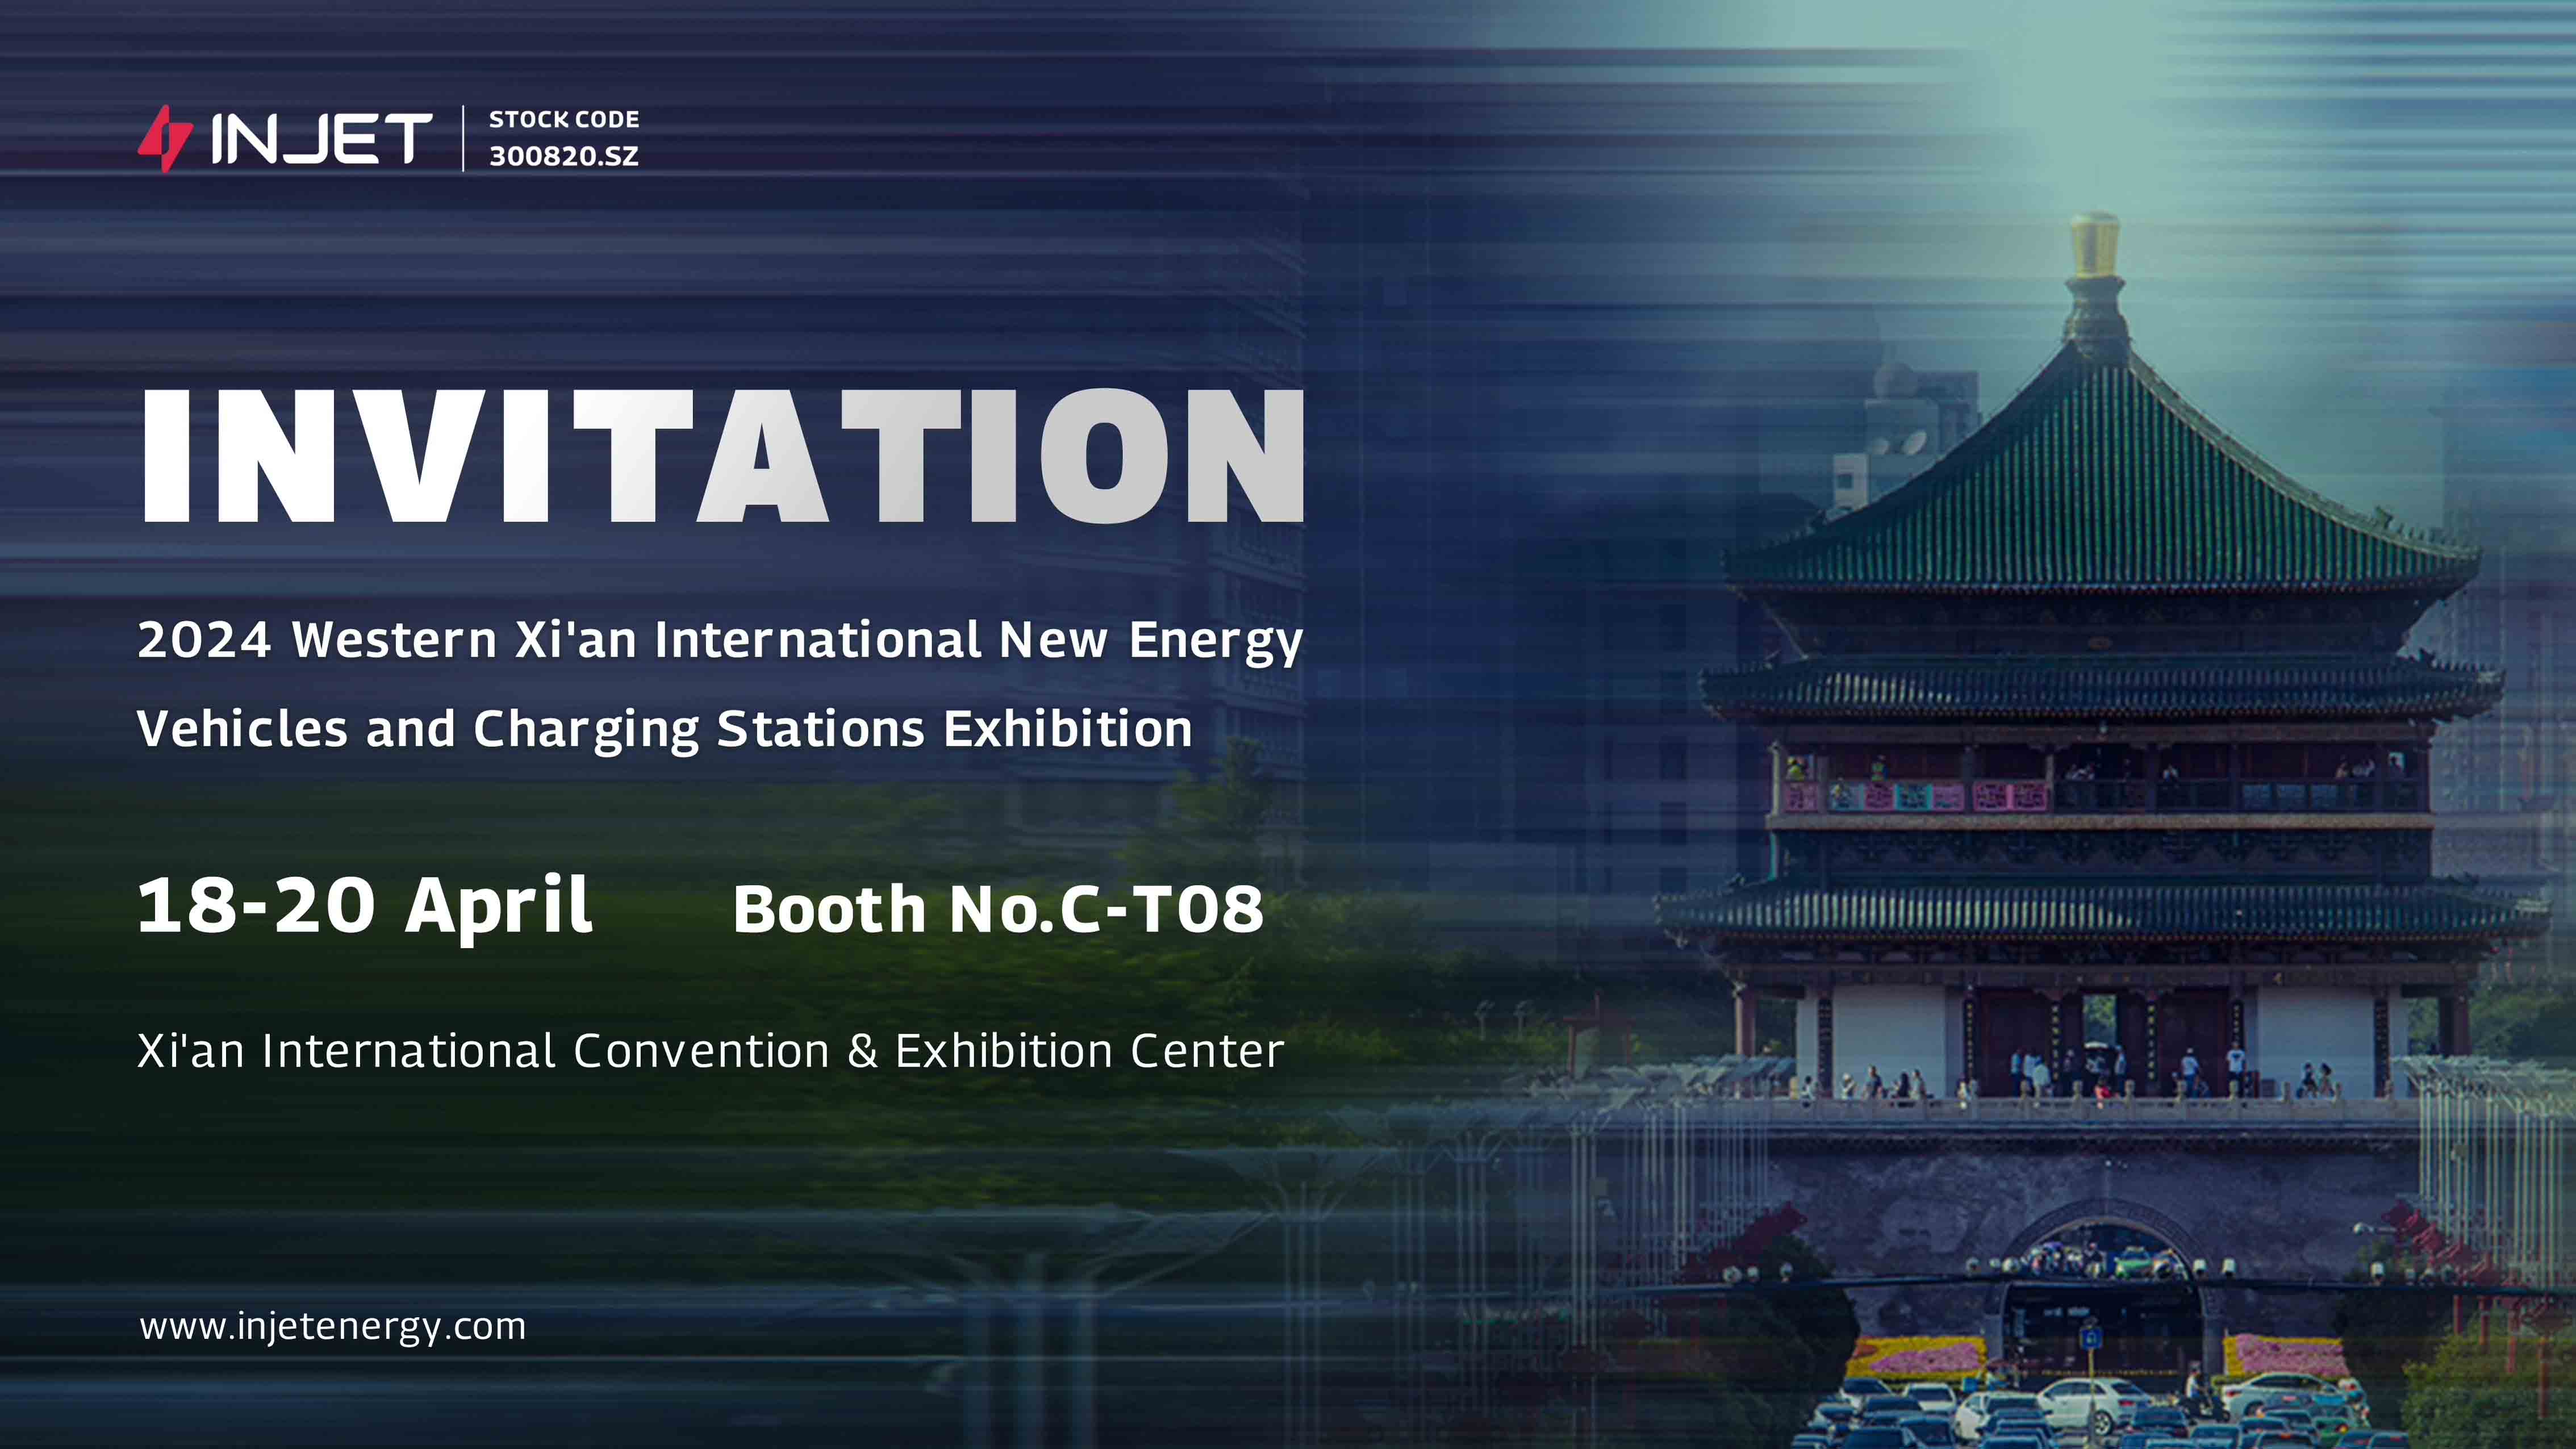 Join Us at the 2024 Western Xi’an International New Energy Vehicles and Charging Stations Exhibition